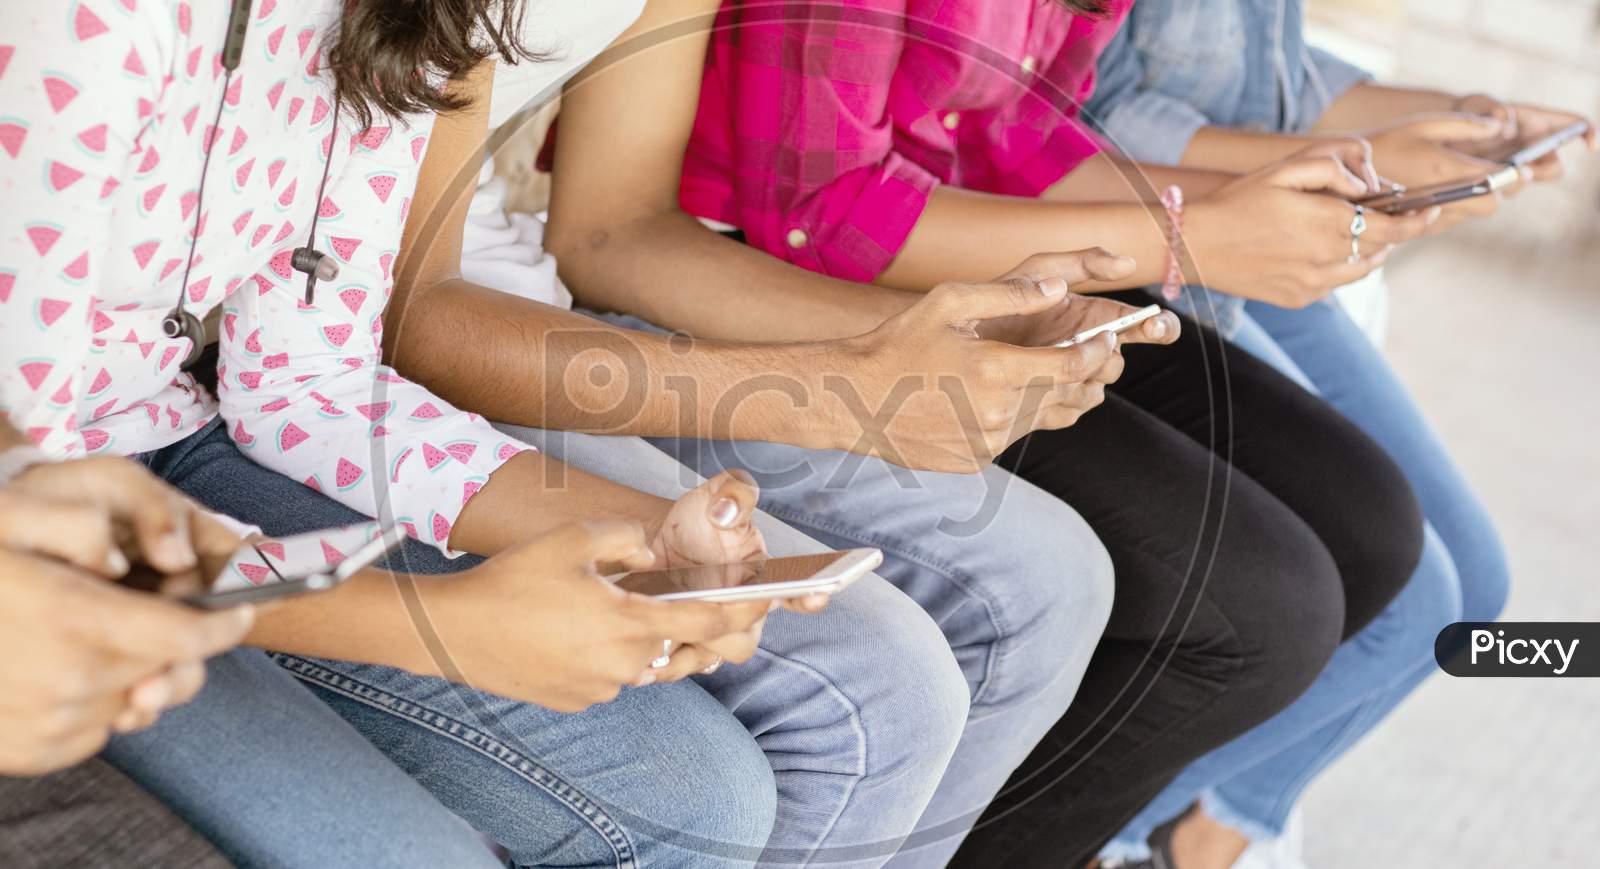 A Group of Young People using Mobile Phone or Smartphone At Outdoors